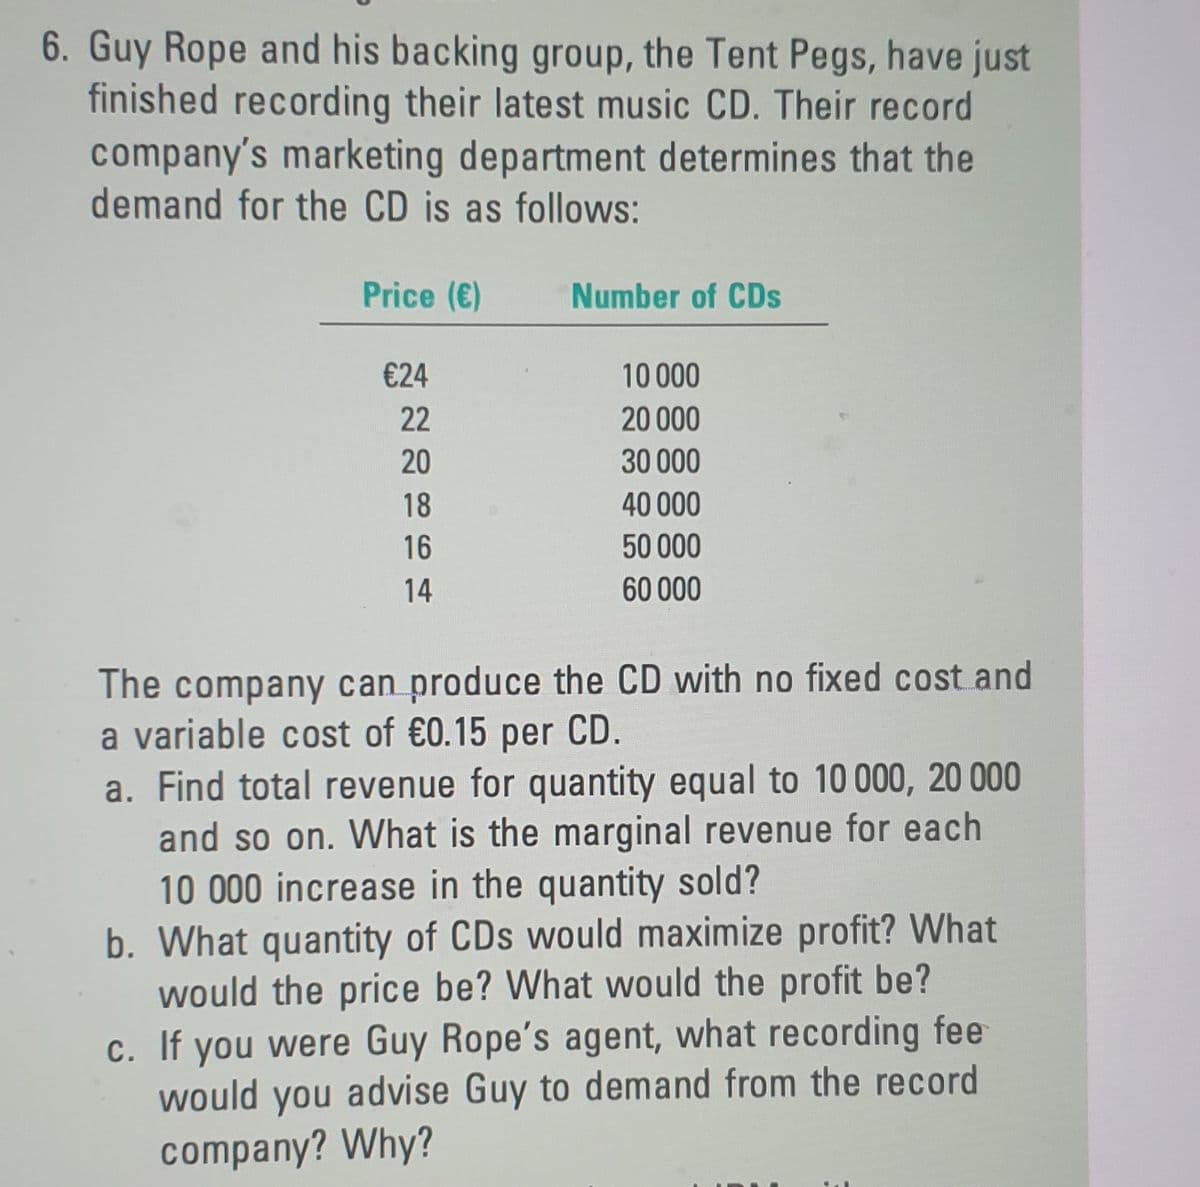 6. Guy Rope and his backing group, the Tent Pegs, have just
finished recording their latest music CD. Their record
company's marketing department determines that the
demand for the CD is as follows:
Price (€)
Number of CDs
€24
10 000
22
20 000
20
30 000
18
40 000
16
50 000
14
60 000
The company can produce the CD with no fixed cost and
a variable cost of €0.15 per CD.
a. Find total revenue for quantity equal to 10 000, 20 000
and so on. What is the marginal revenue for each
10 000 increase in the quantity sold?
b. What quantity of CDs would maximize profit? What
would the price be? What would the profit be?
c. If you were Guy Rope's agent, what recording fee
would you advise Guy to demand from the record
company? Why?
